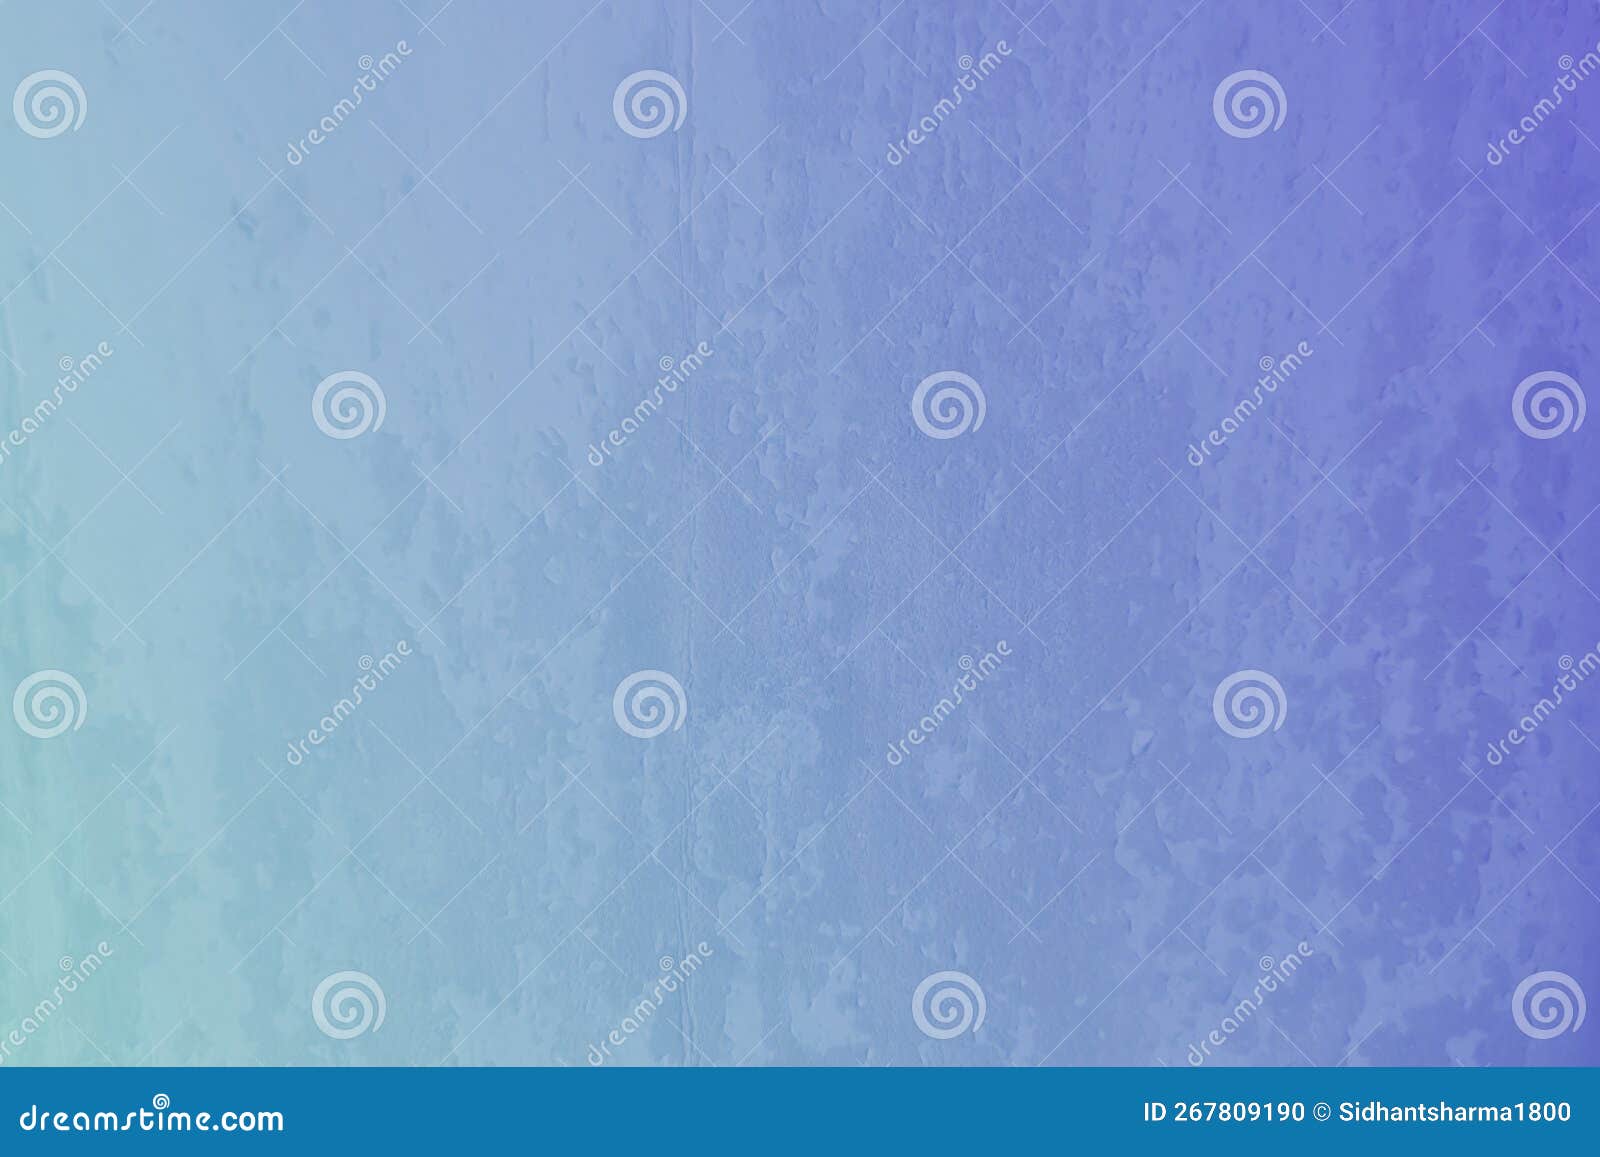 abstract ligh bluegreen and twilight blue multi colors mixture wall textured background